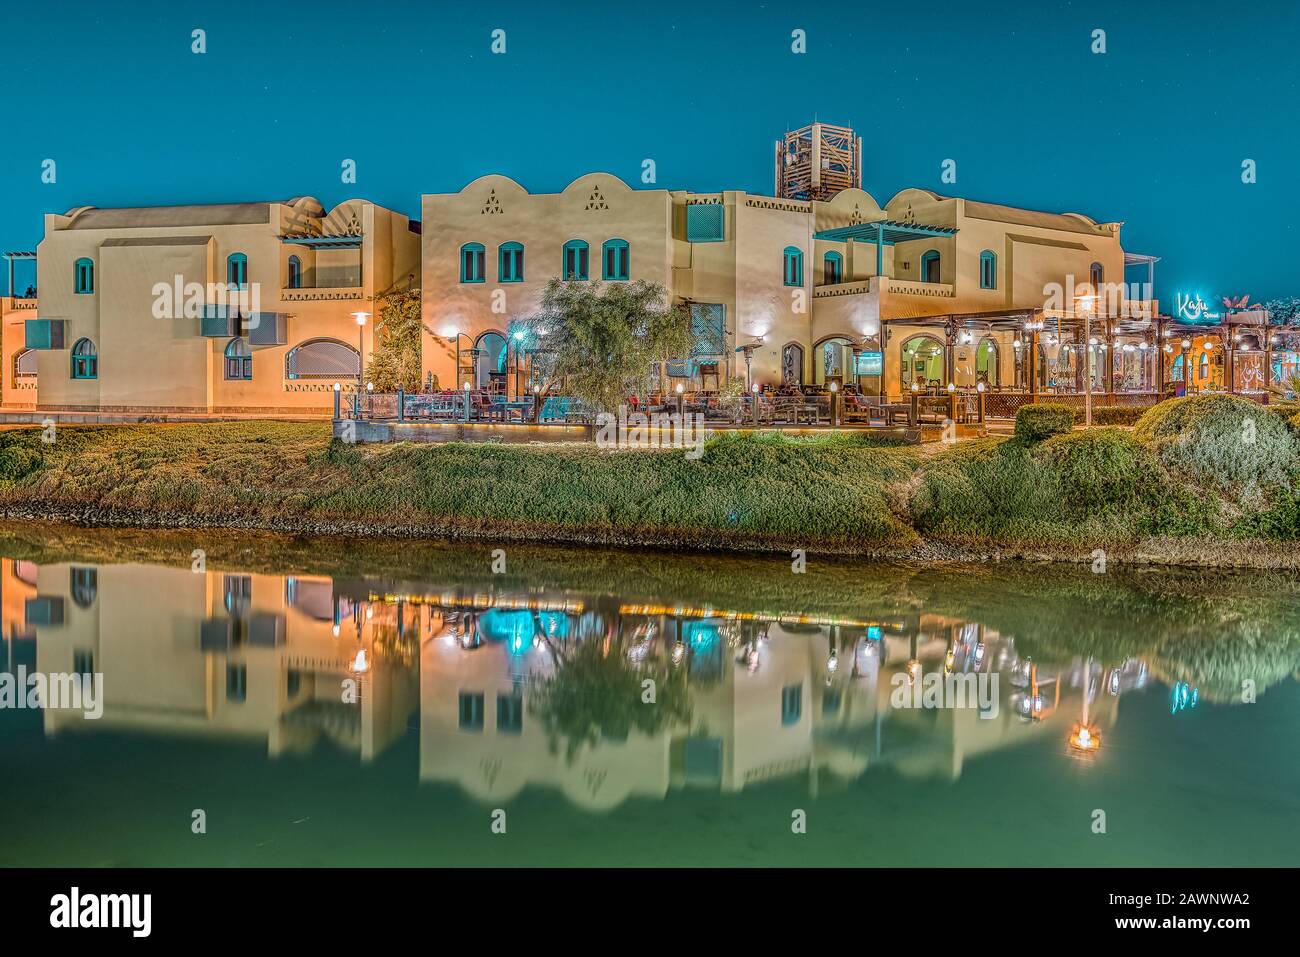 Egypian restaurants at night reflecting in the calm water of the lagoon, el Gouna, Egypt, January 16, 2020 Stock Photo